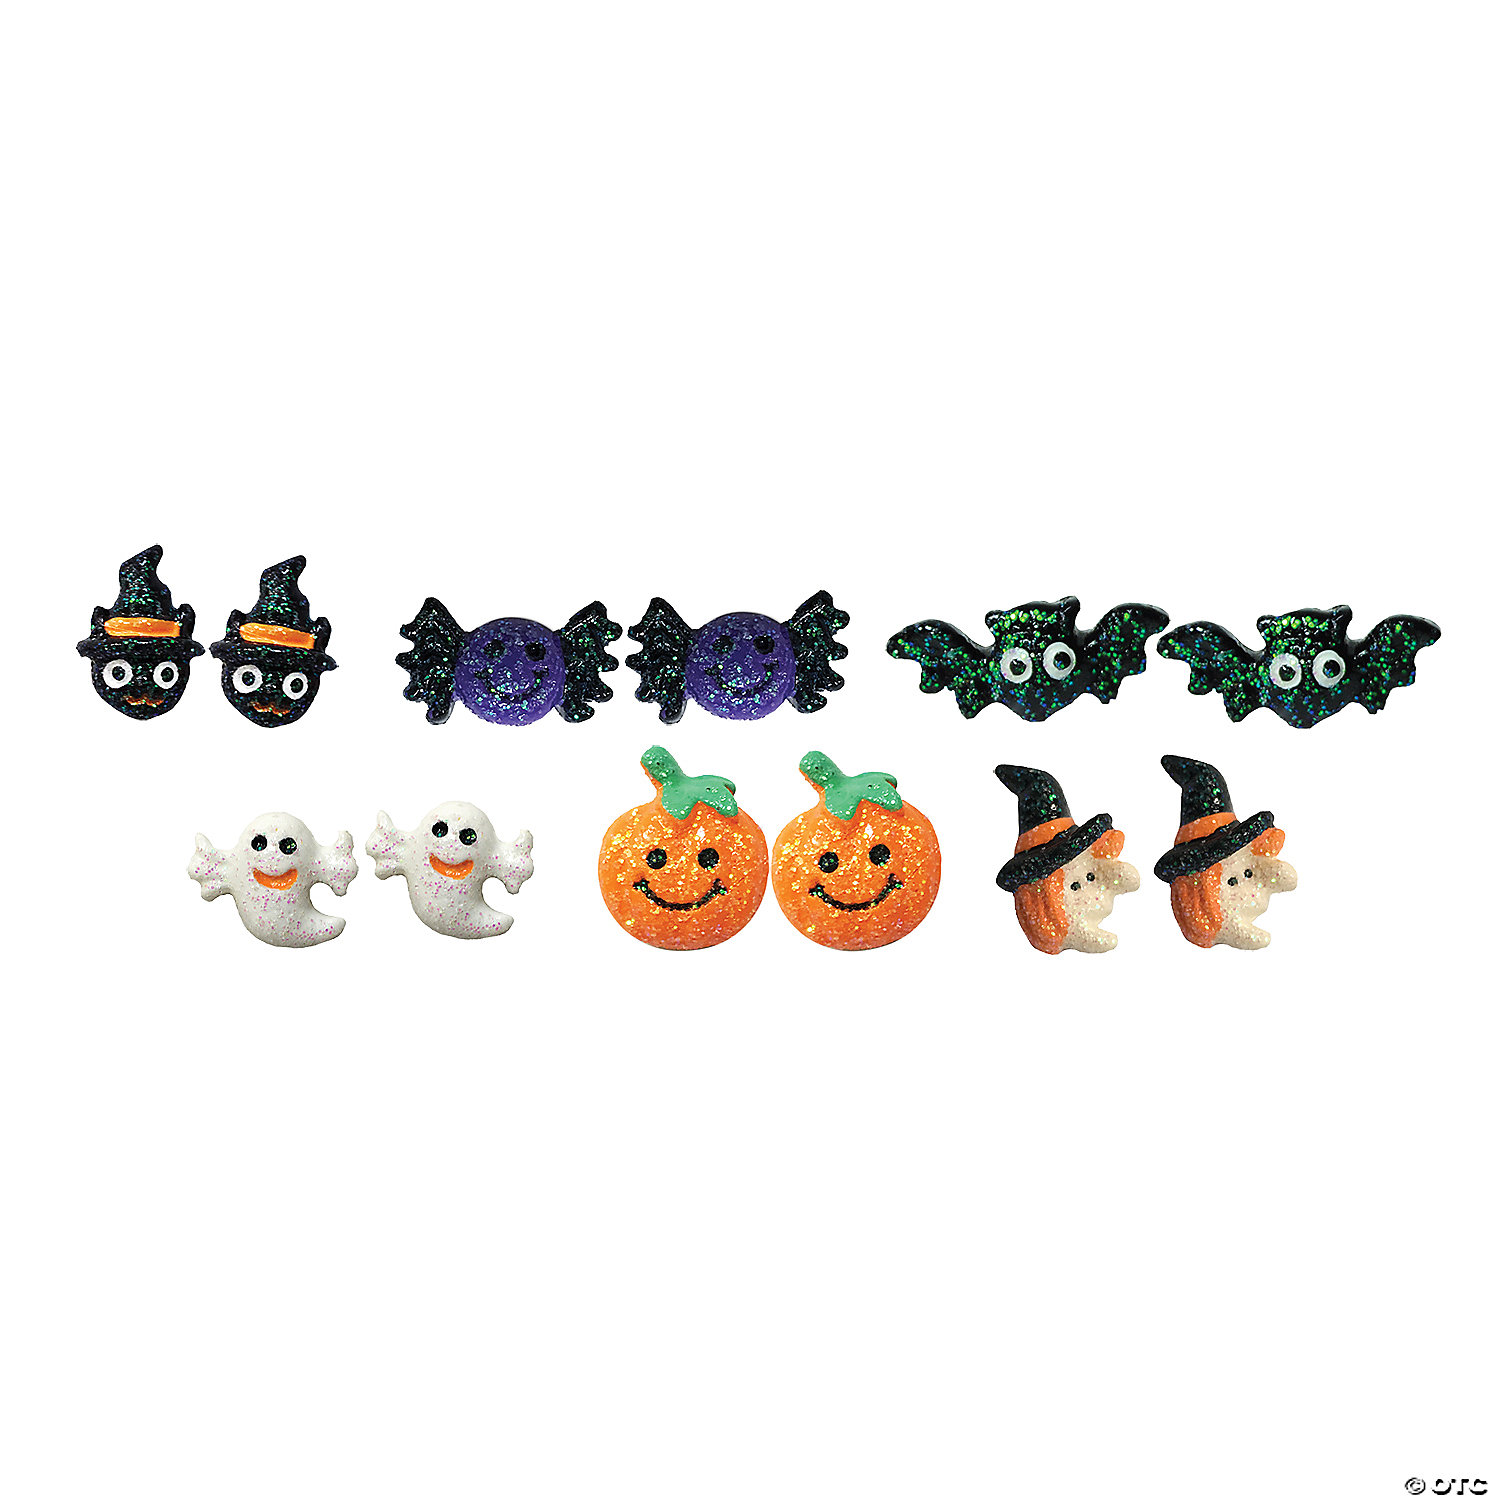 Girls Out Loud Morris Costumes Earring Set - 6 Pairs